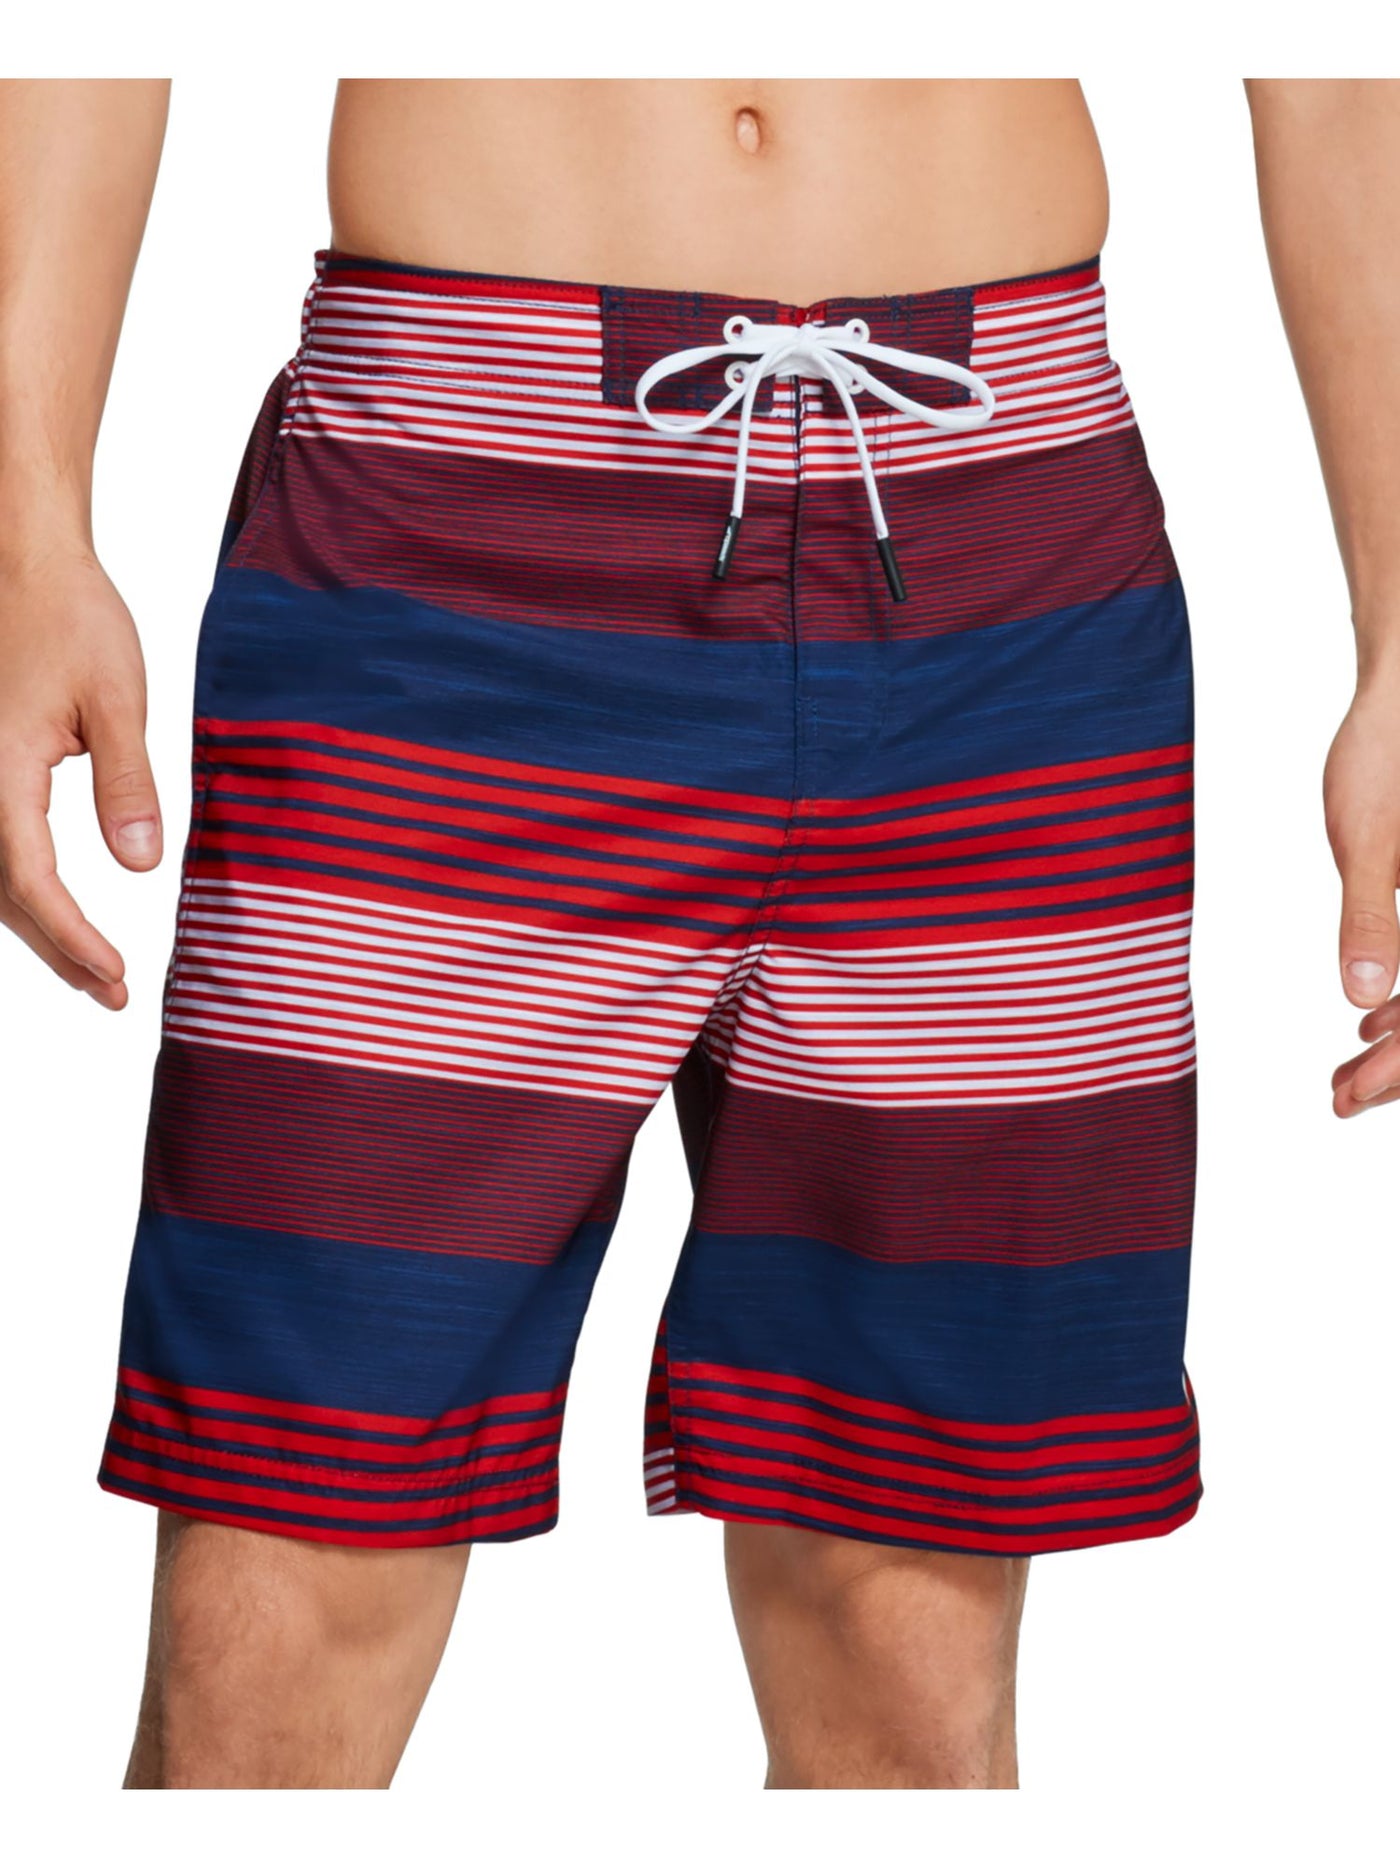 SPEEDO Mens Red Lightweight Active Striped Athletic Fit Swim Trunks S